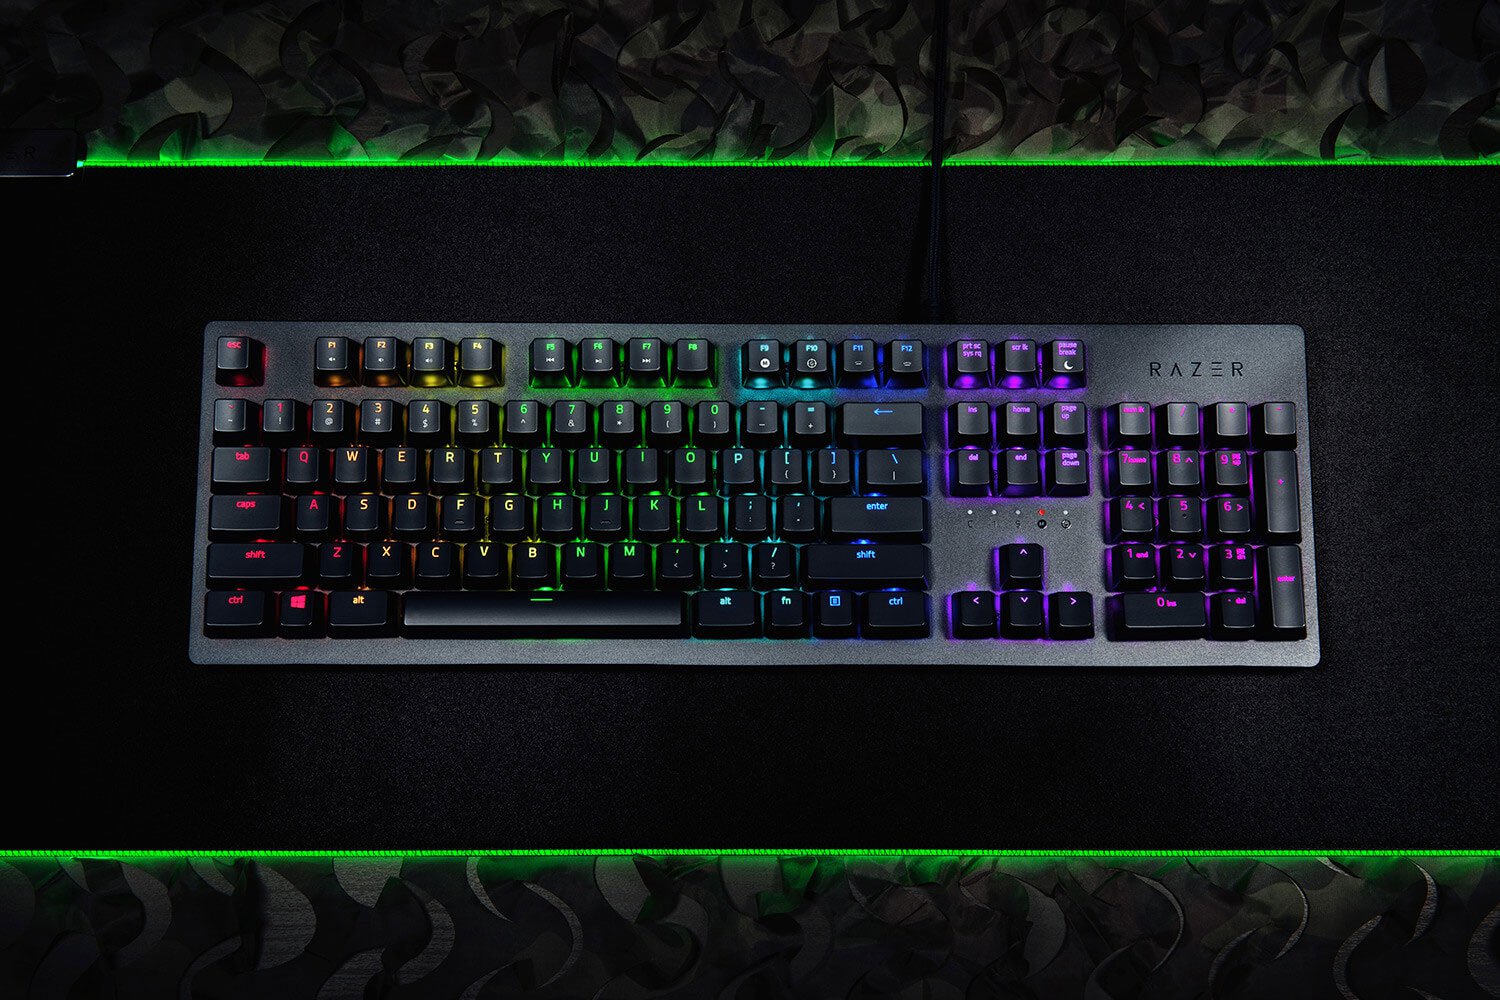 The Gaming Keyboard With Evolved Razer Optical Switch Technology For Unmatched Speed And Optical Actuation